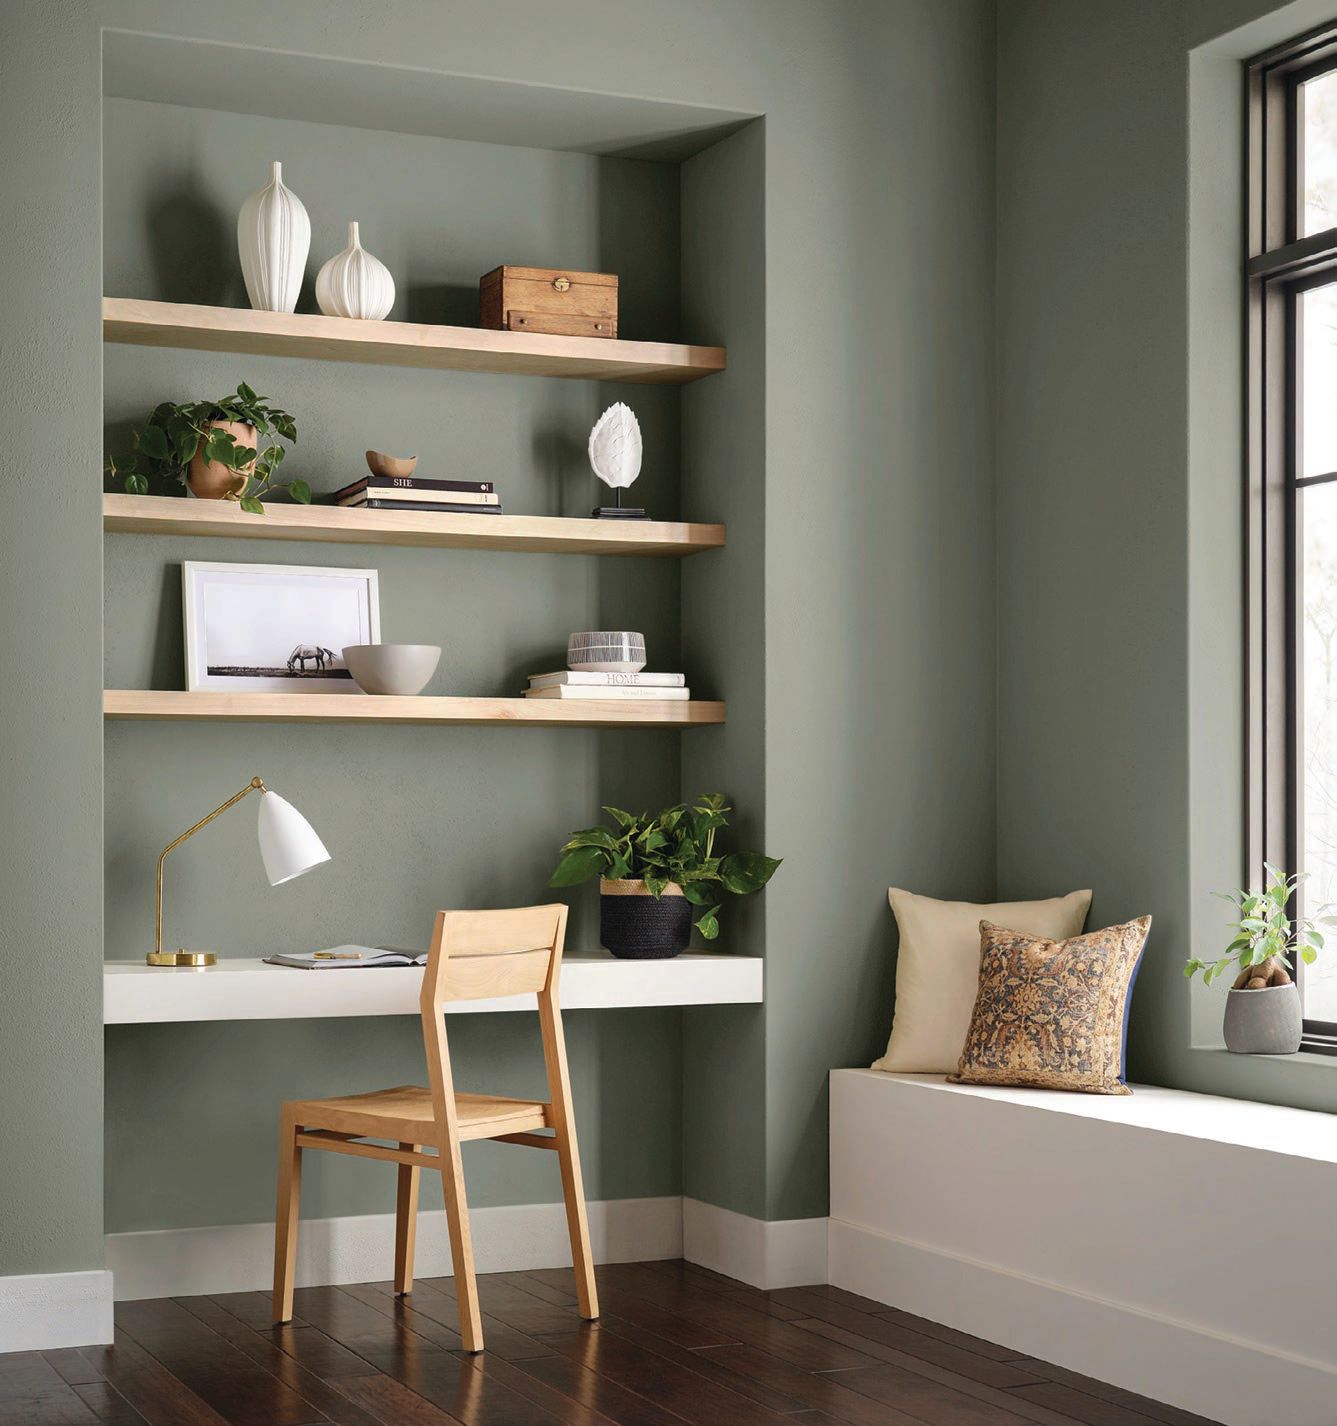 Use Sherwin-Williams’ Evergreen Fog as a balancing element in your newly appointed home office. PHOTO COURTESY OF SHERWIN-WILLIAMS